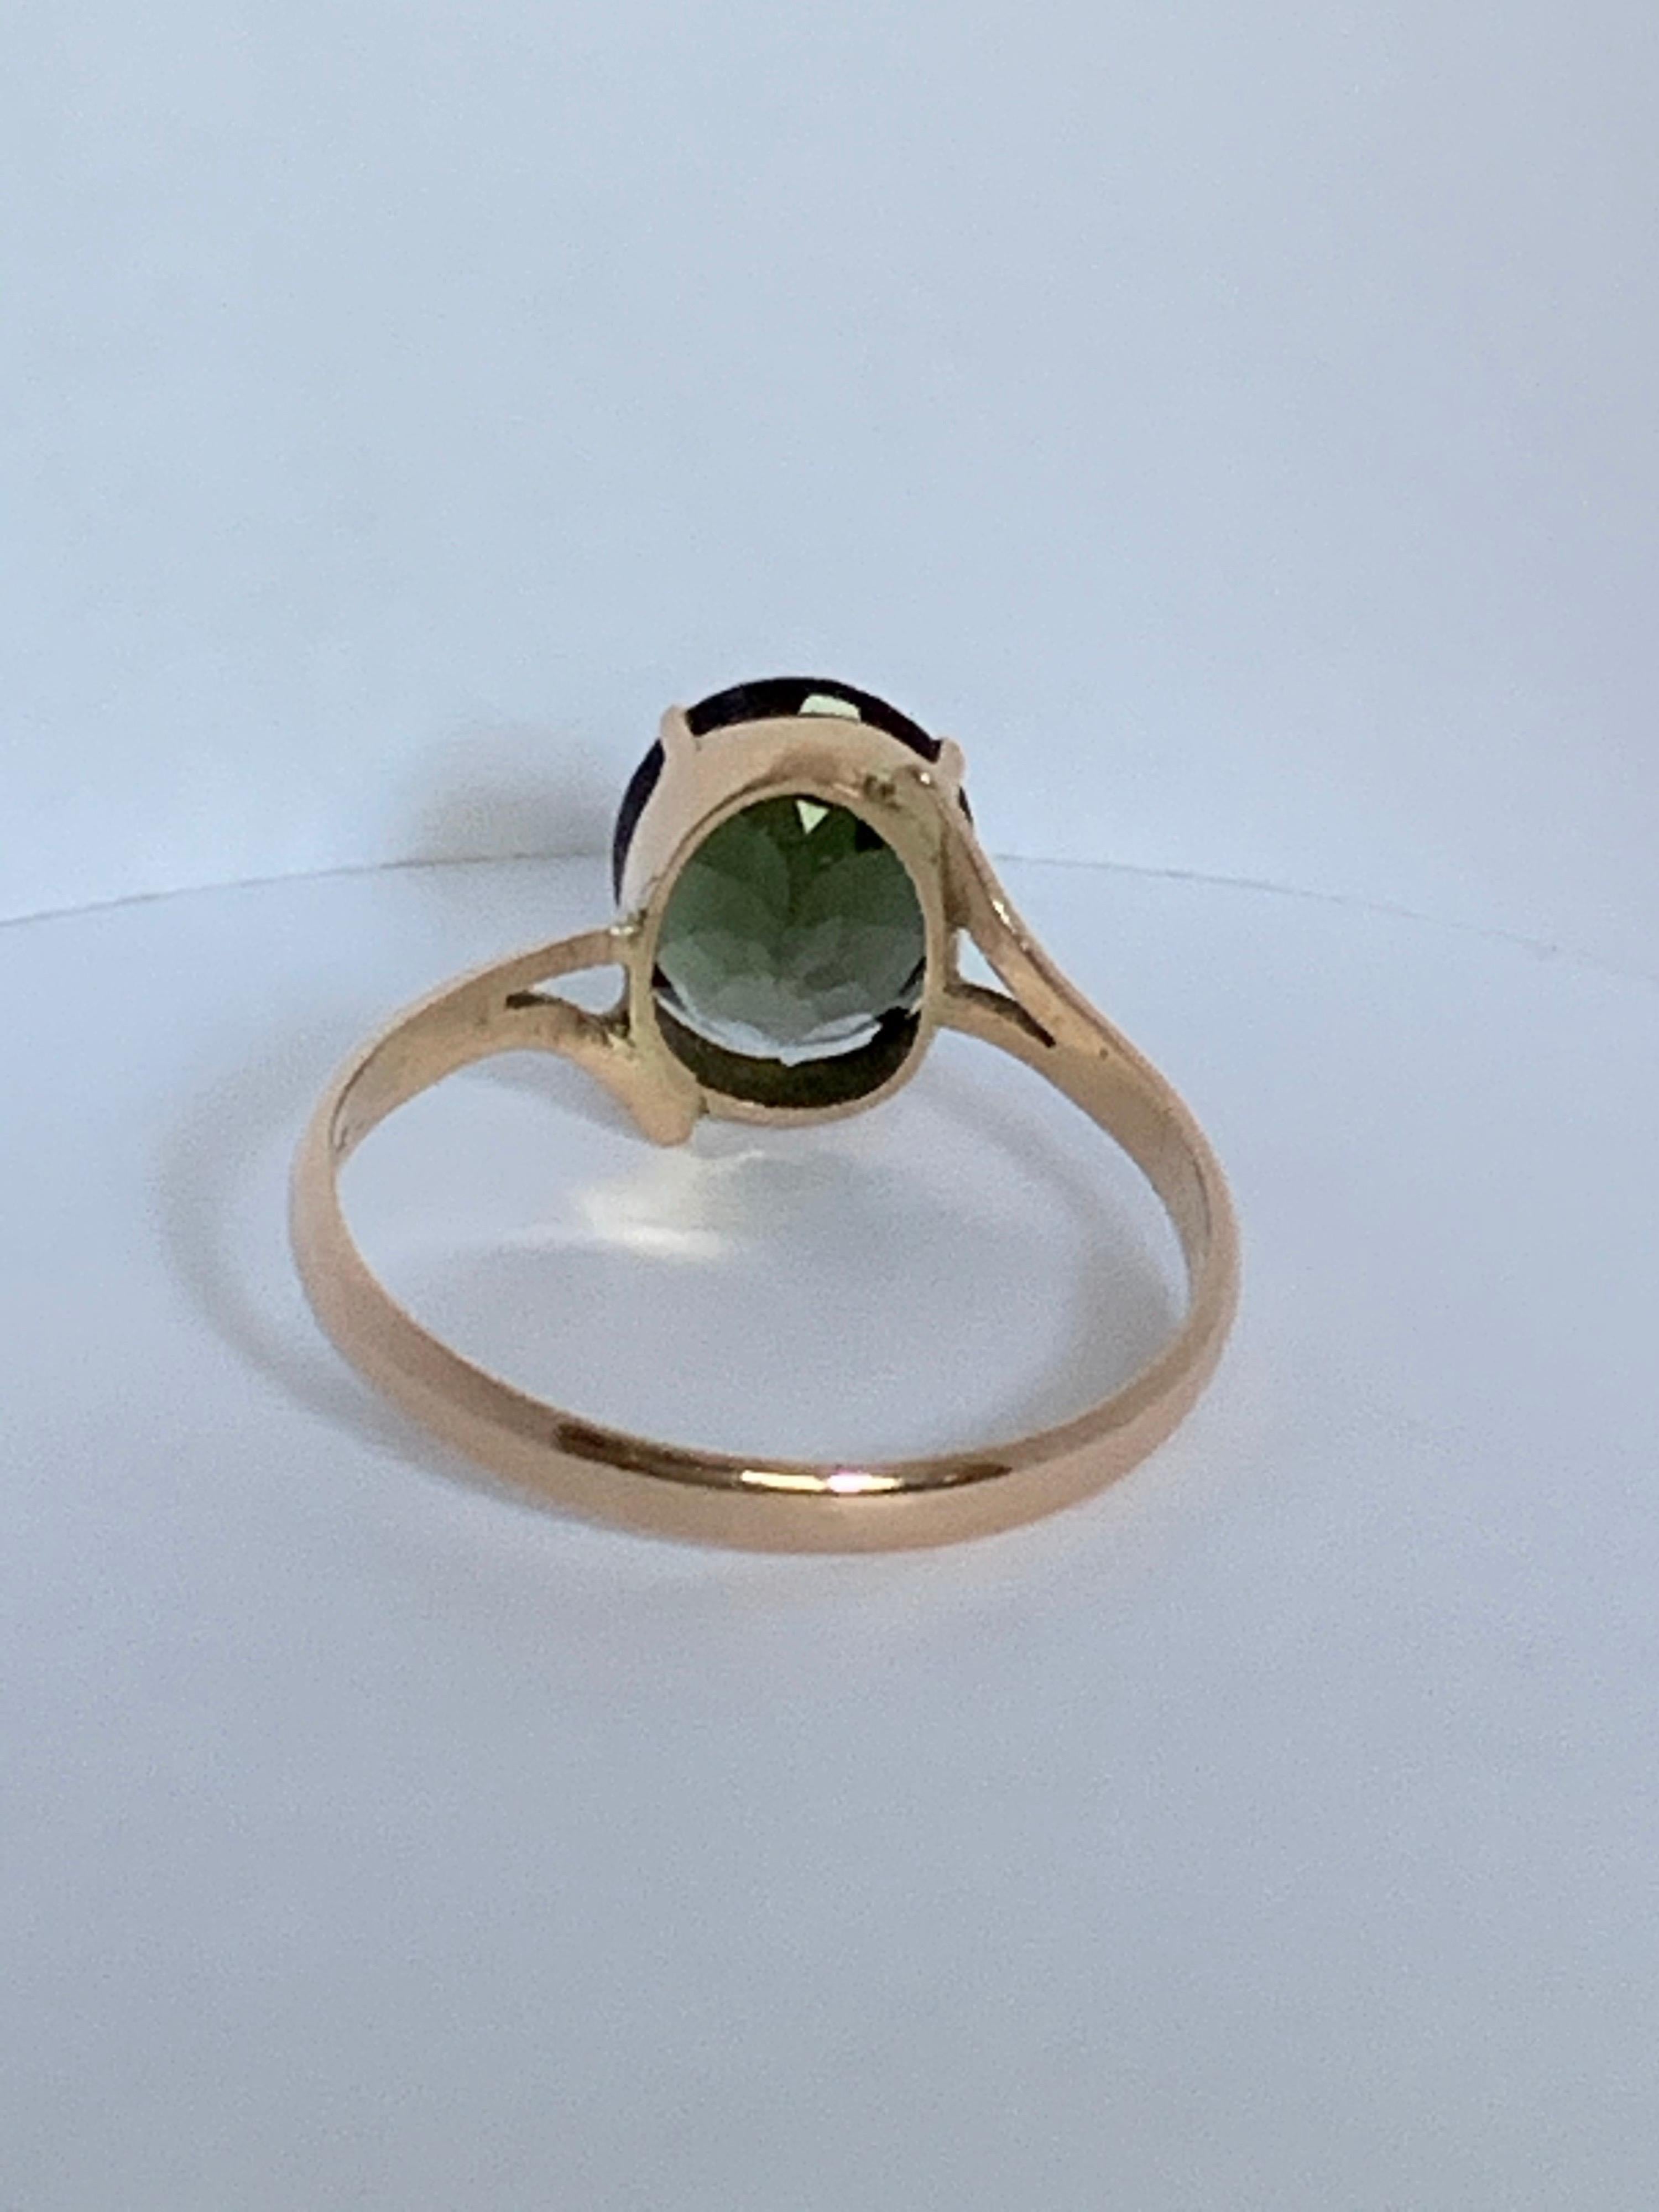 Natural oval green 7 mm X 9 mm Tourmaline approximately weighs 2.35 carat. Hand cut and polished. Stone is clean with no inclusion.